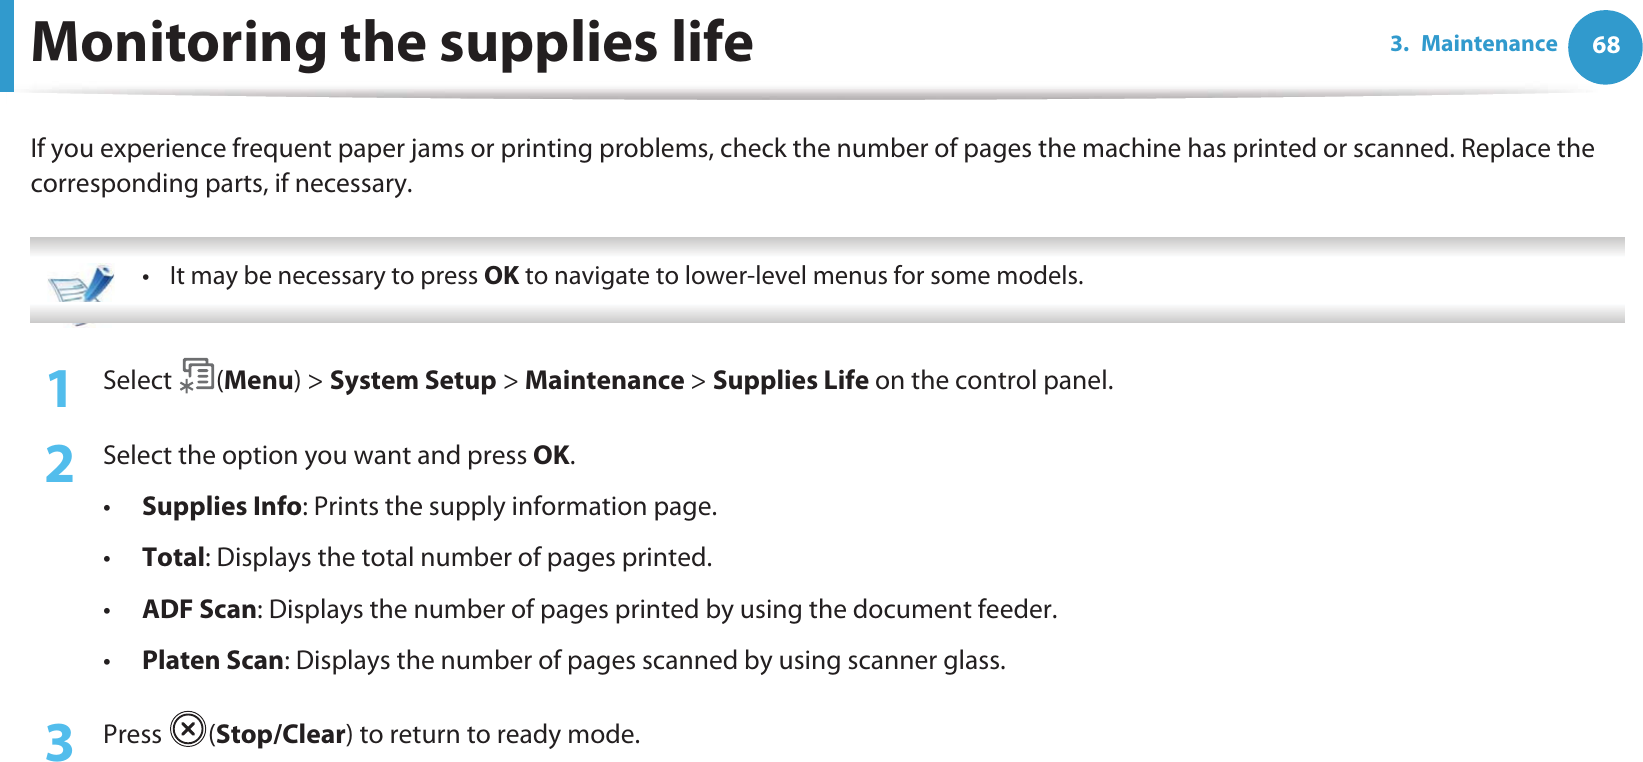 683. MaintenanceMonitoring the supplies lifeIf you experience frequent paper jams or printing problems, check the number of pages the machine has printed or scanned. Replace the corresponding parts, if necessary. • It may be necessary to press OK to navigate to lower-level menus for some models. 1Select (Menu) &gt; System Setup &gt; Maintenance &gt; Supplies Life on the control panel.2  Select the option you want and press OK.•Supplies Info: Prints the supply information page.•Total: Displays the total number of pages printed.•ADF Scan: Displays the number of pages printed by using the document feeder.•Platen Scan: Displays the number of pages scanned by using scanner glass.3  Press (Stop/Clear) to return to ready mode.